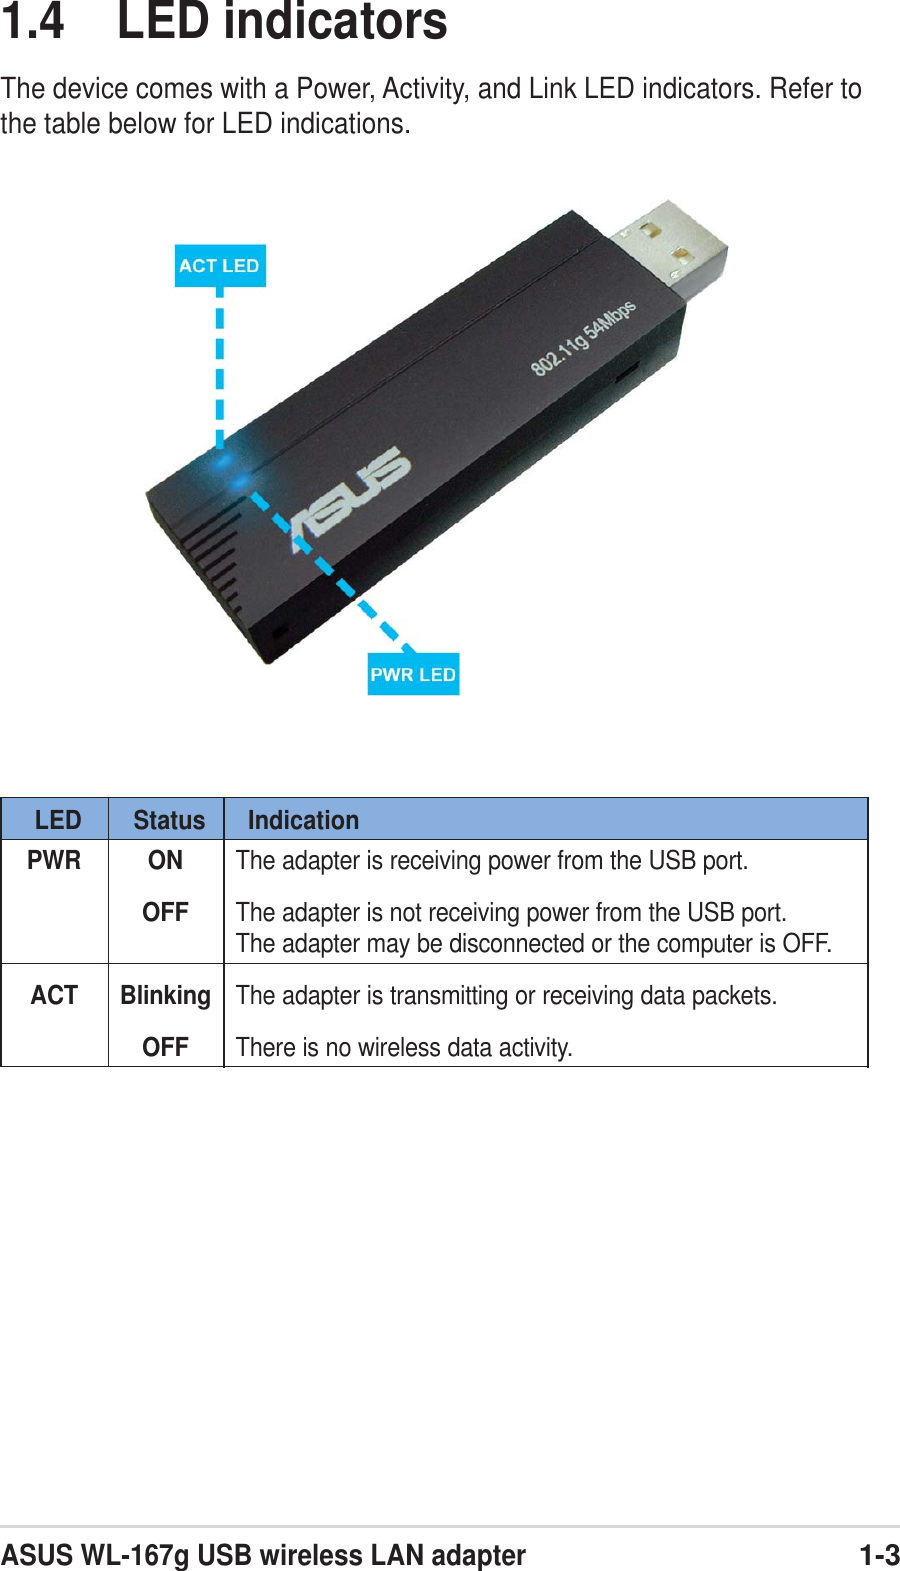 ASUS WL-167g USB wireless LAN adapter1-31.4 LED indicatorsThe device comes with a Power, Activity, and Link LED indicators. Refer tothe table below for LED indications.LED Status IndicationPWR ON The adapter is receiving power from the USB port.OFF The adapter is not receiving power from the USB port.The adapter may be disconnected or the computer is OFF.ACT Blinking The adapter is transmitting or receiving data packets.OFF There is no wireless data activity.